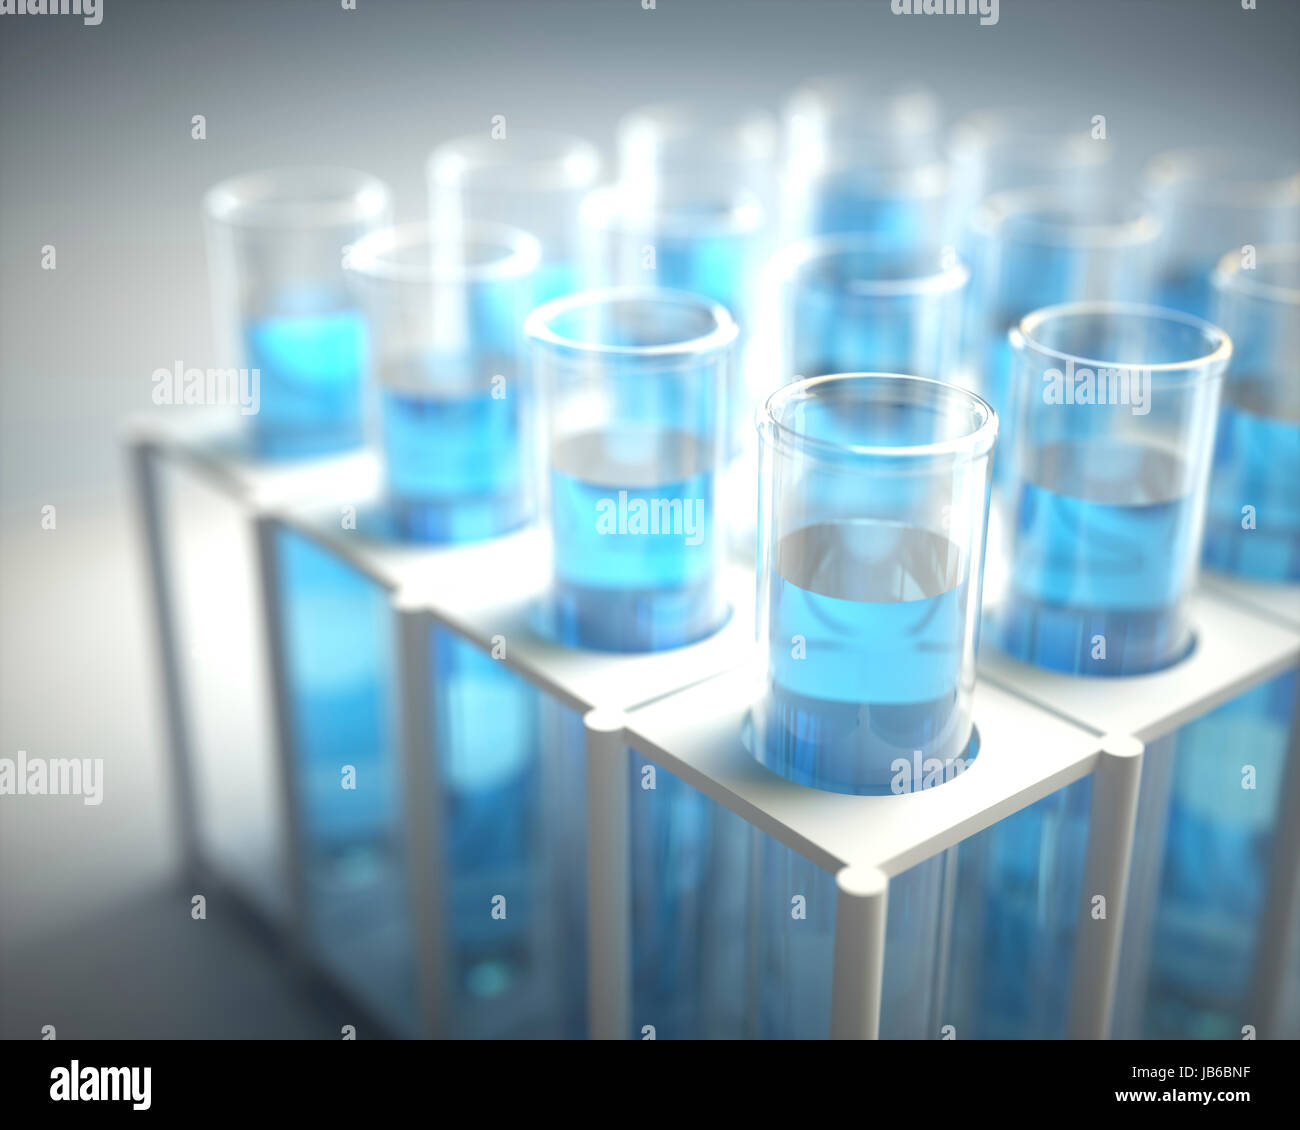 Test tubes with pipette, illustration. Stock Photo